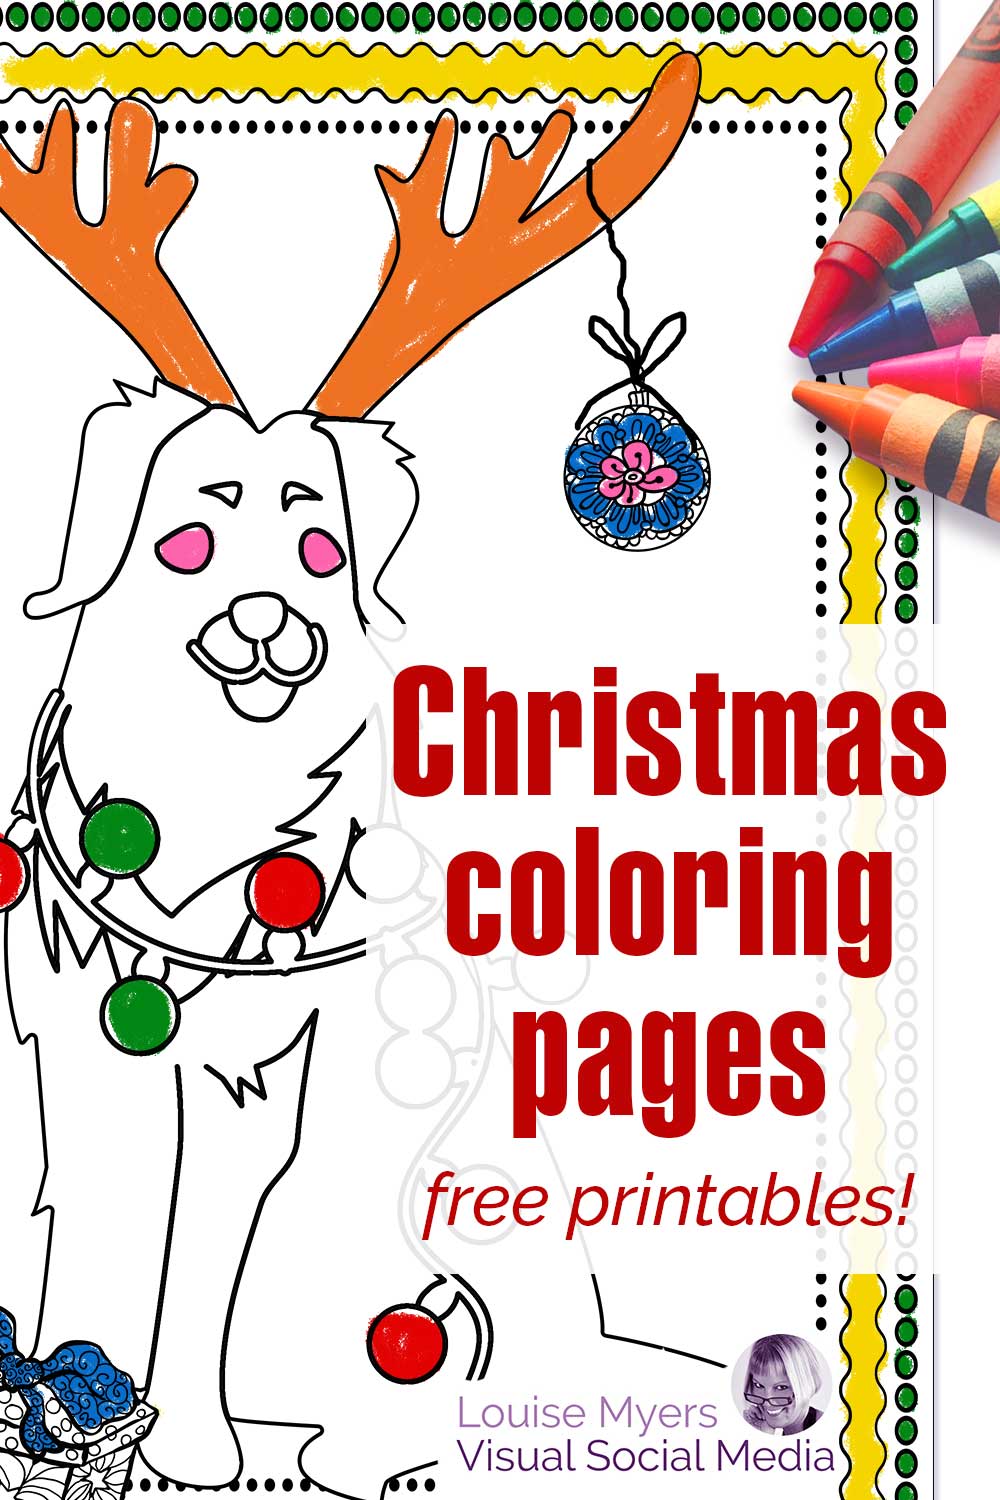 image says Christmas coloring pages with crayons and drawing of dog with reindeer antlers in background.